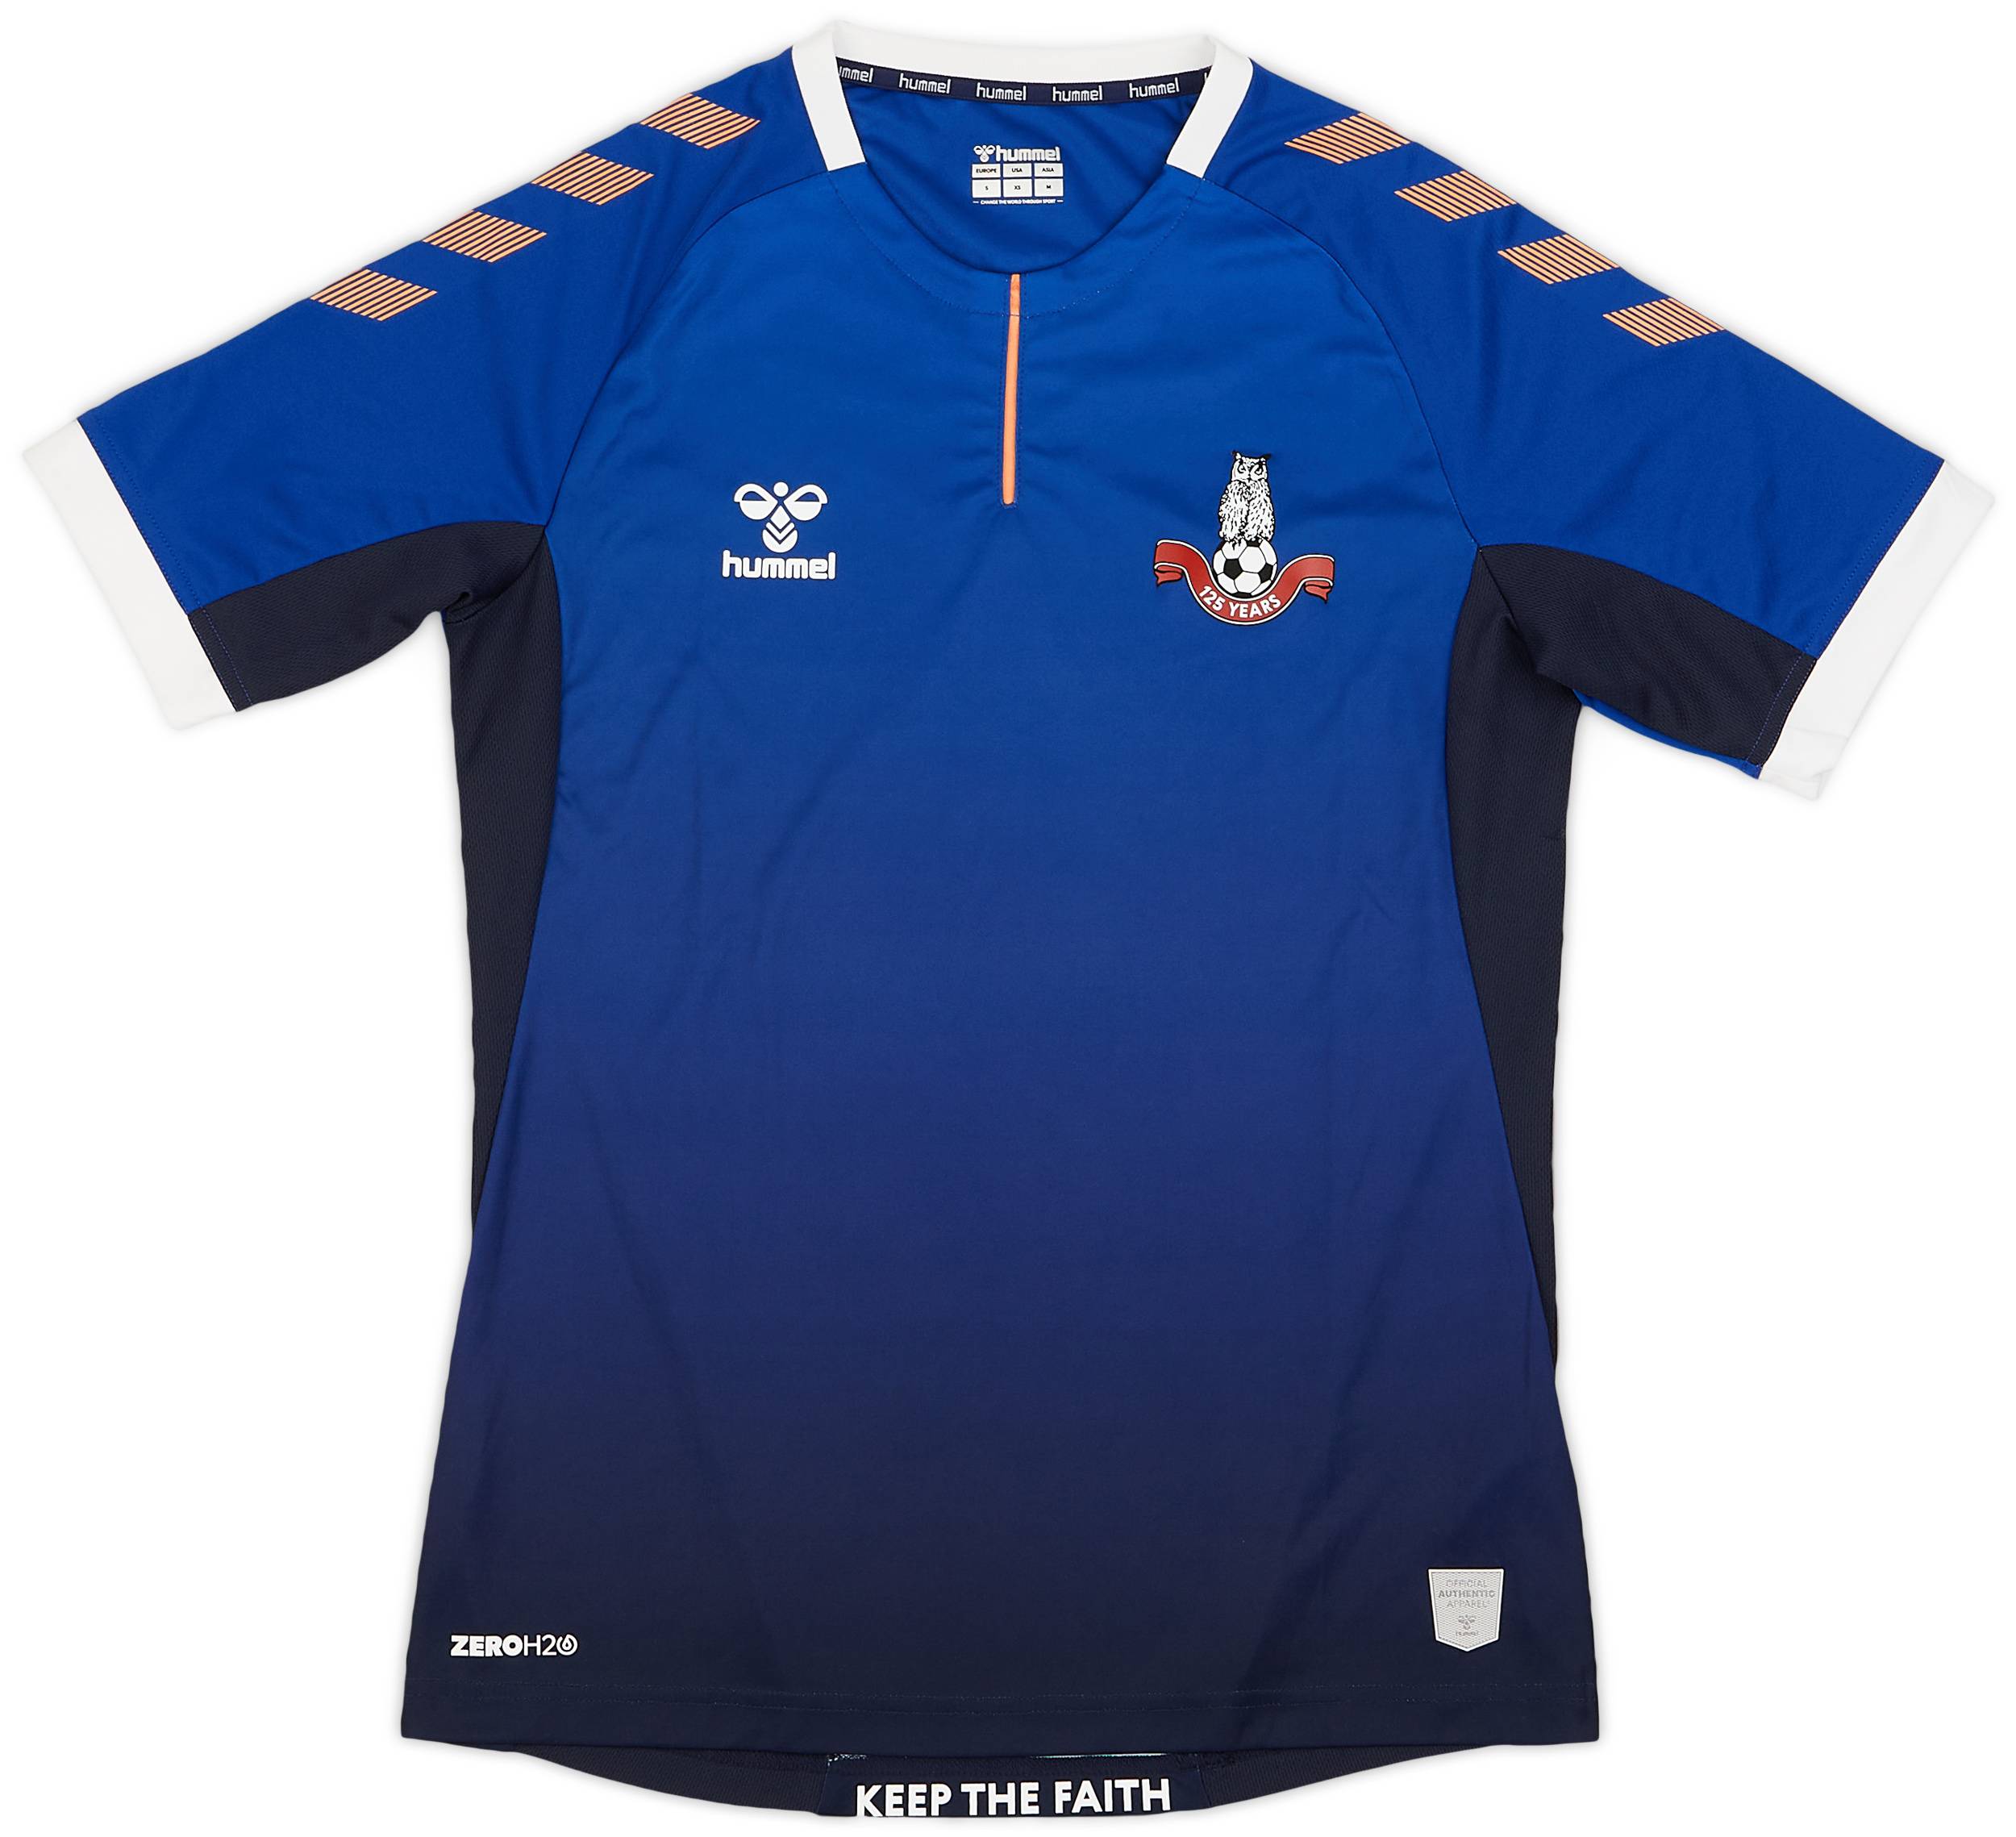 2020-21 Oldham Home Shirt - 10/10 - (S)